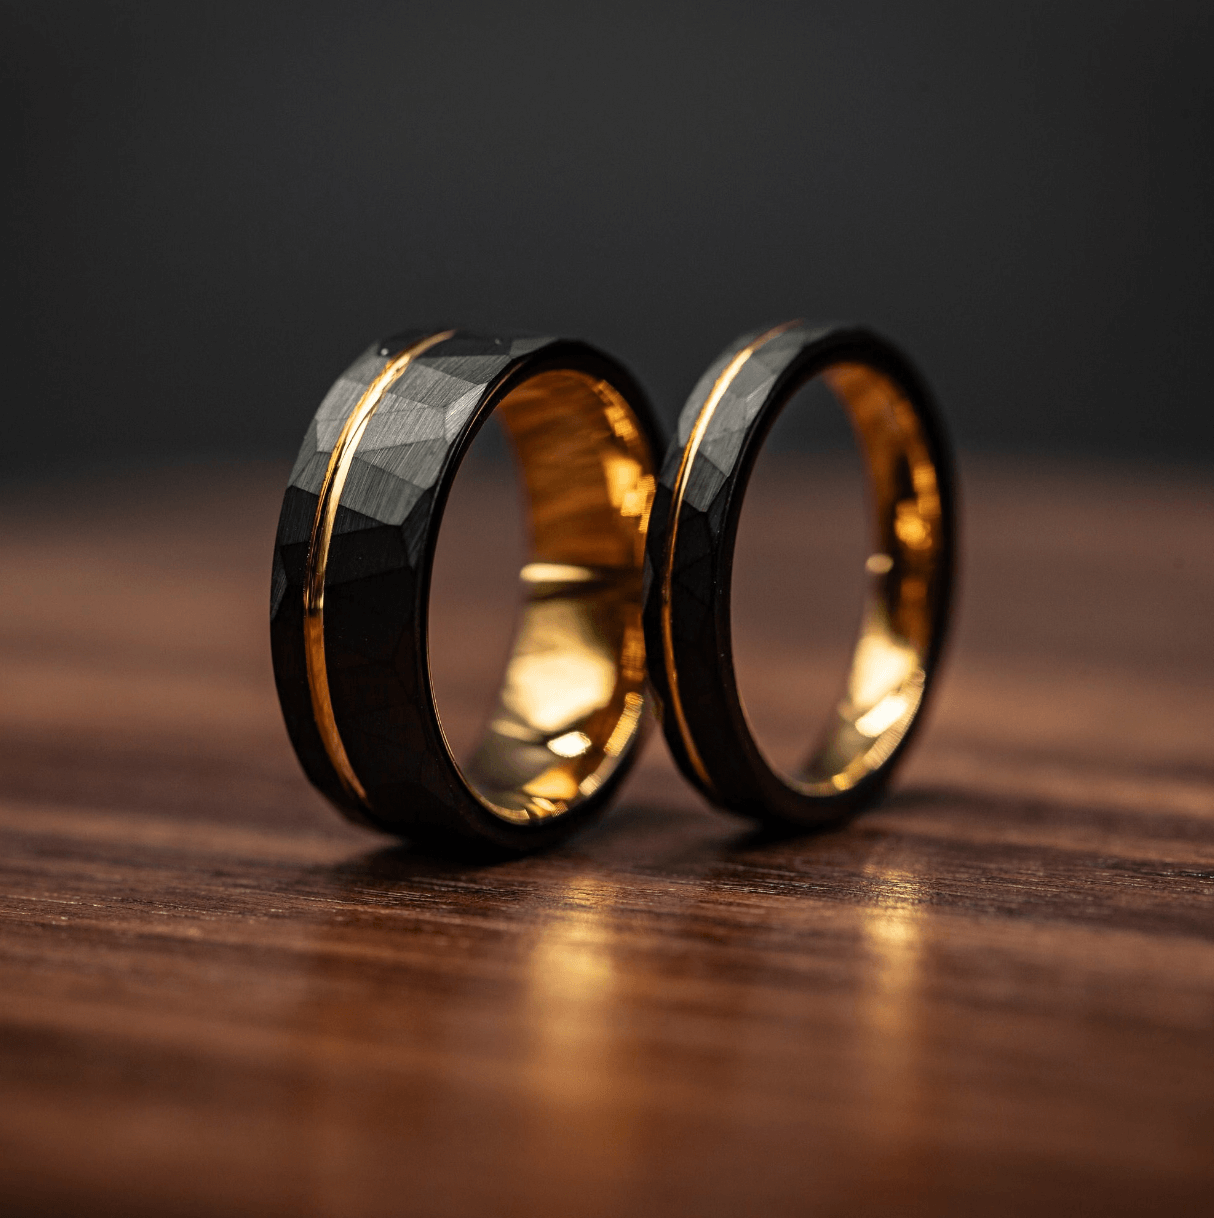 COUPLES HAMMERED BLACK Wedding Ring with yellow Gold, Hammered Ring, Yellow Gold Engagement Ring, Unique Ring, Men and Women's Wedding Band